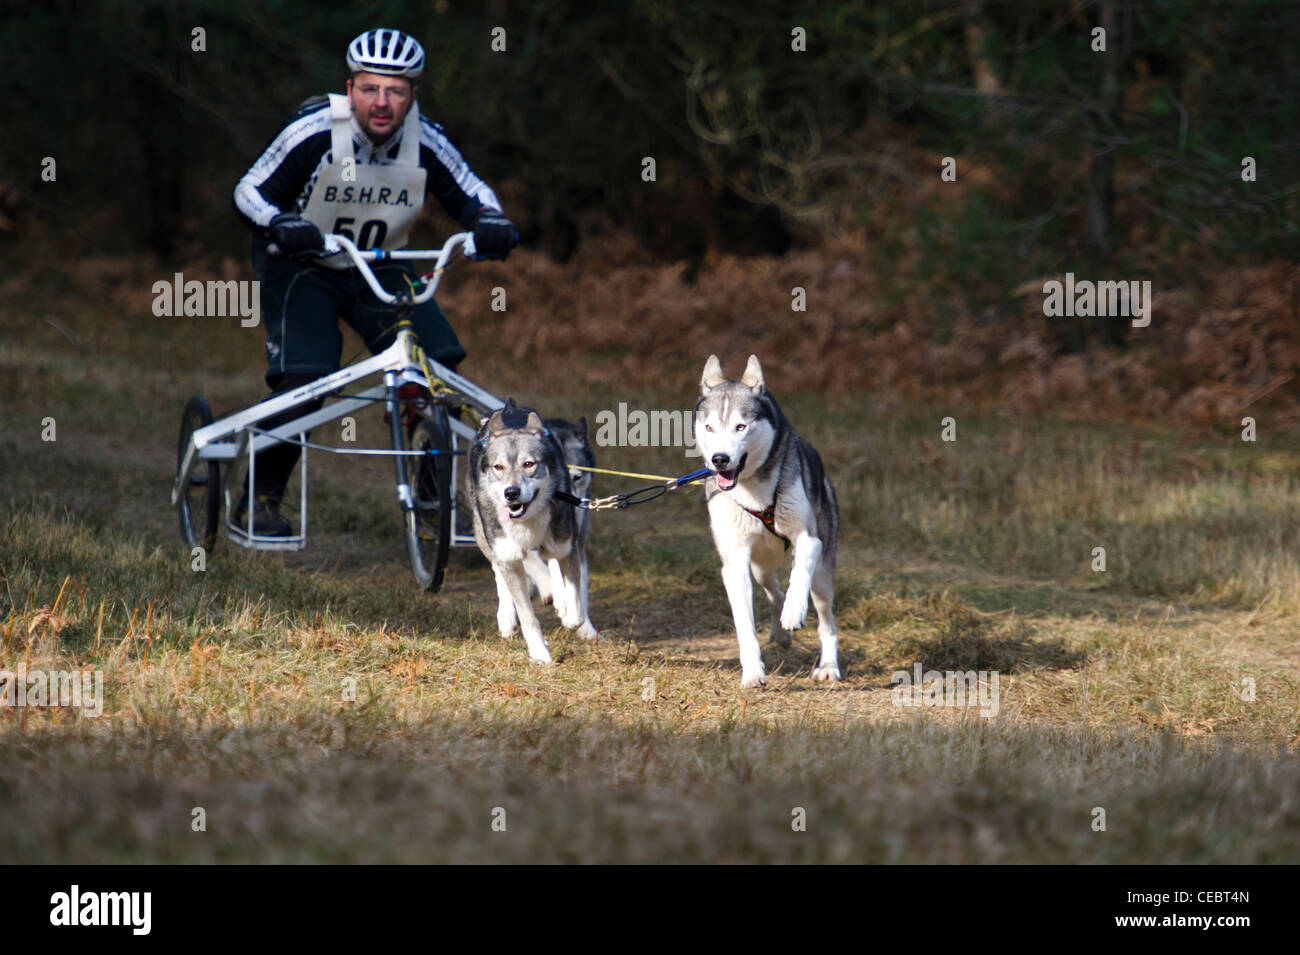 British Siberian Husky Racing Association event held at Elveden Forest, Suffolk, UK Three dog teams competing on a timed lap. Stock Photo